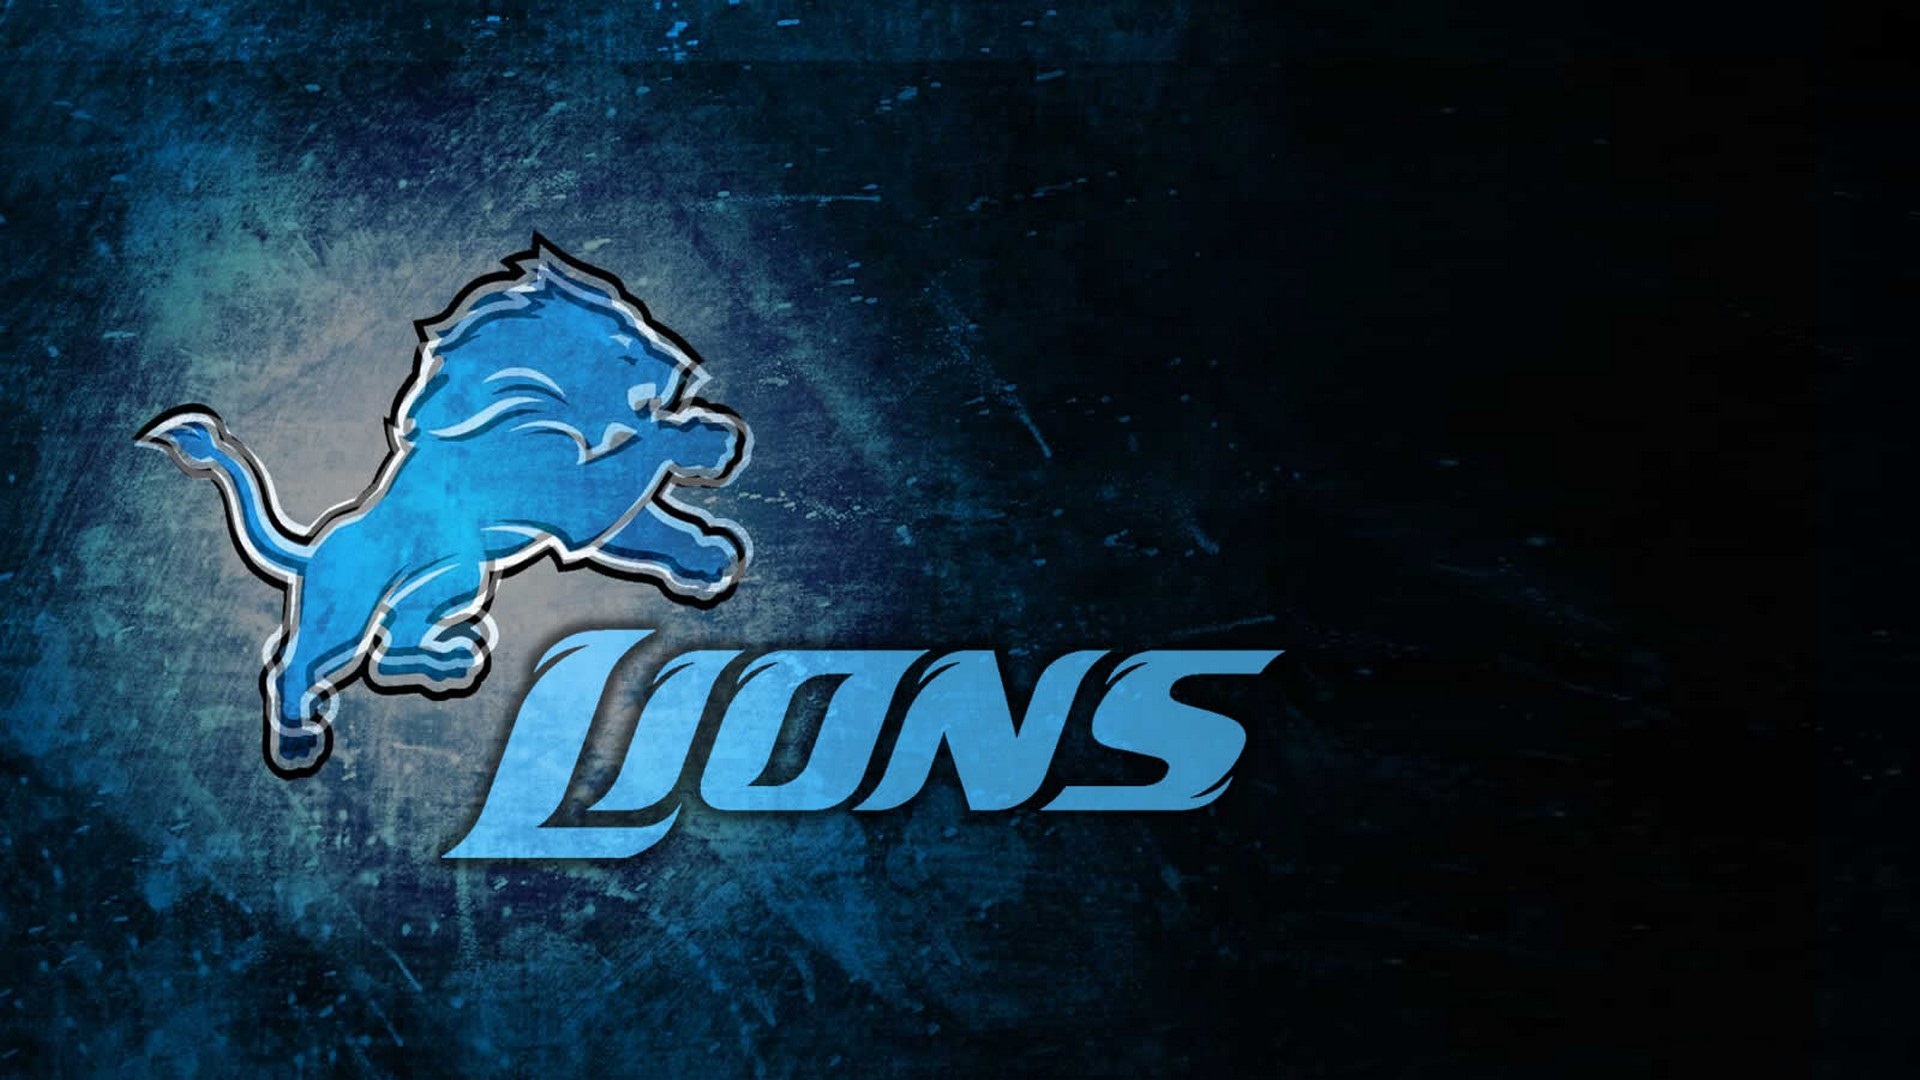 Wallpapers Detroit Lions With Resolution 1920X1080